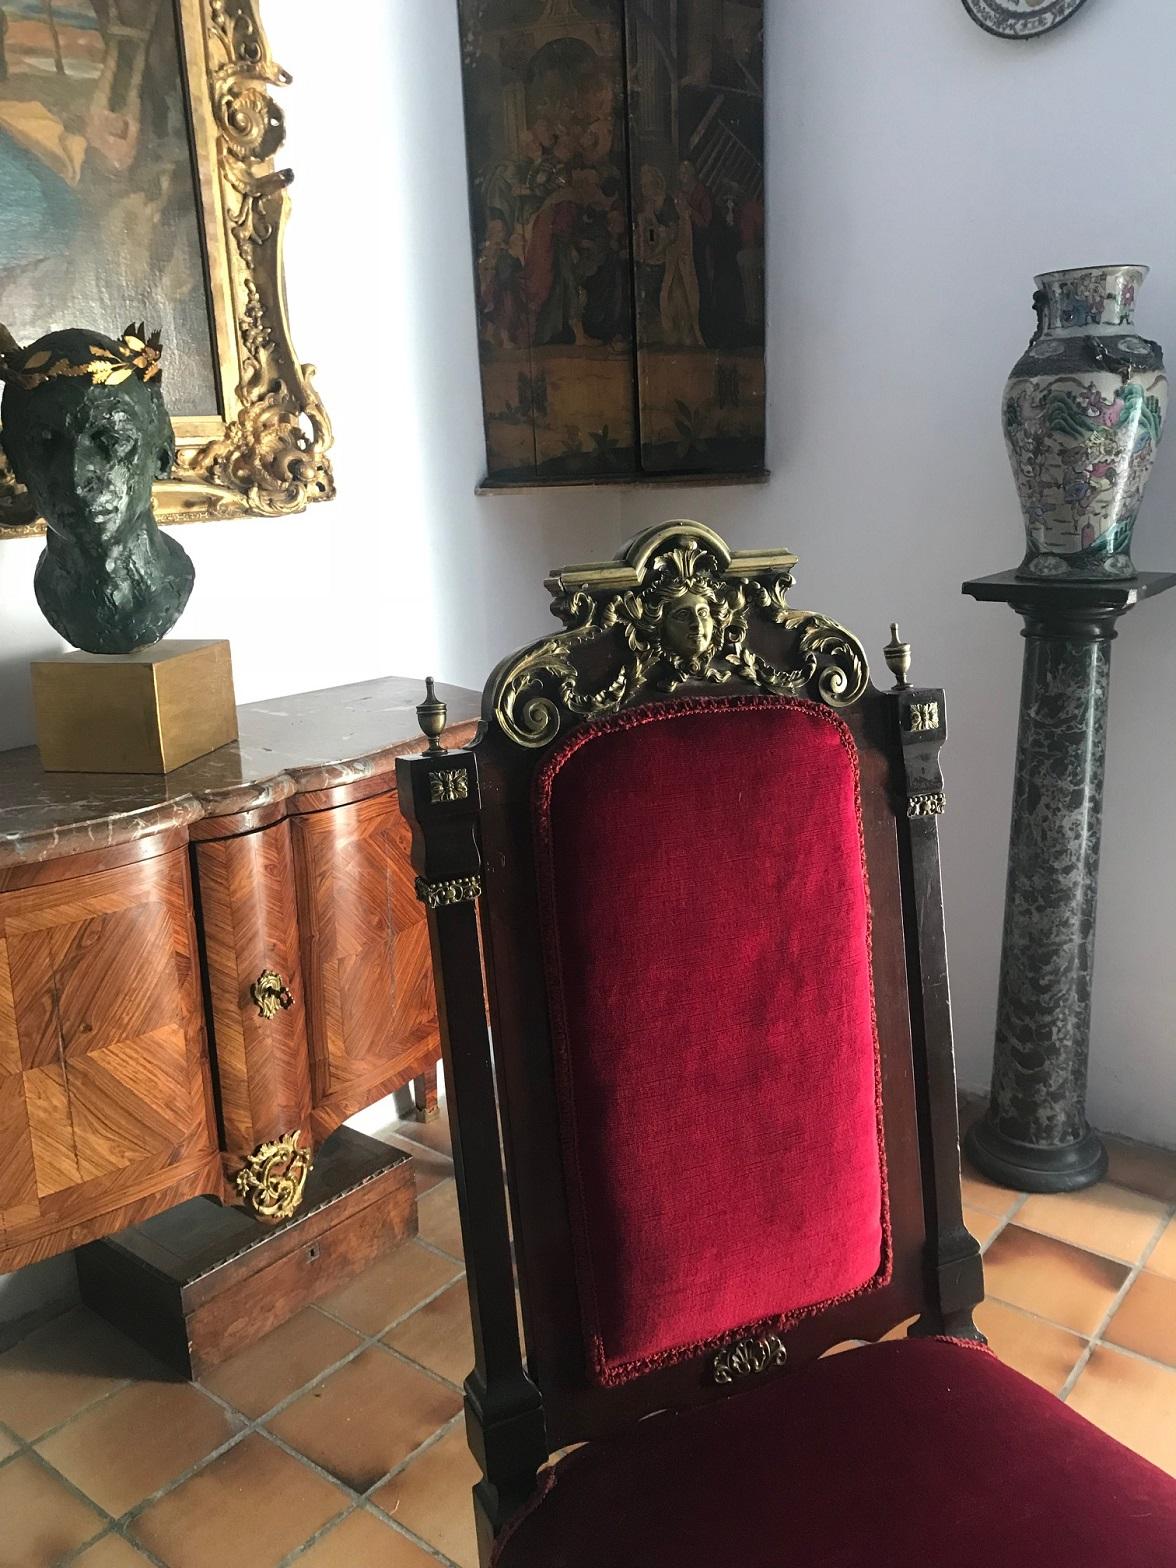 A spectacular 19th century mahogany and ormolu-mounted Napolean III chair. The chair is decorated with a main classical figure adorned with acanthus leaves and various other ormolu mounts. Some of these mounts are missing but this should be evident